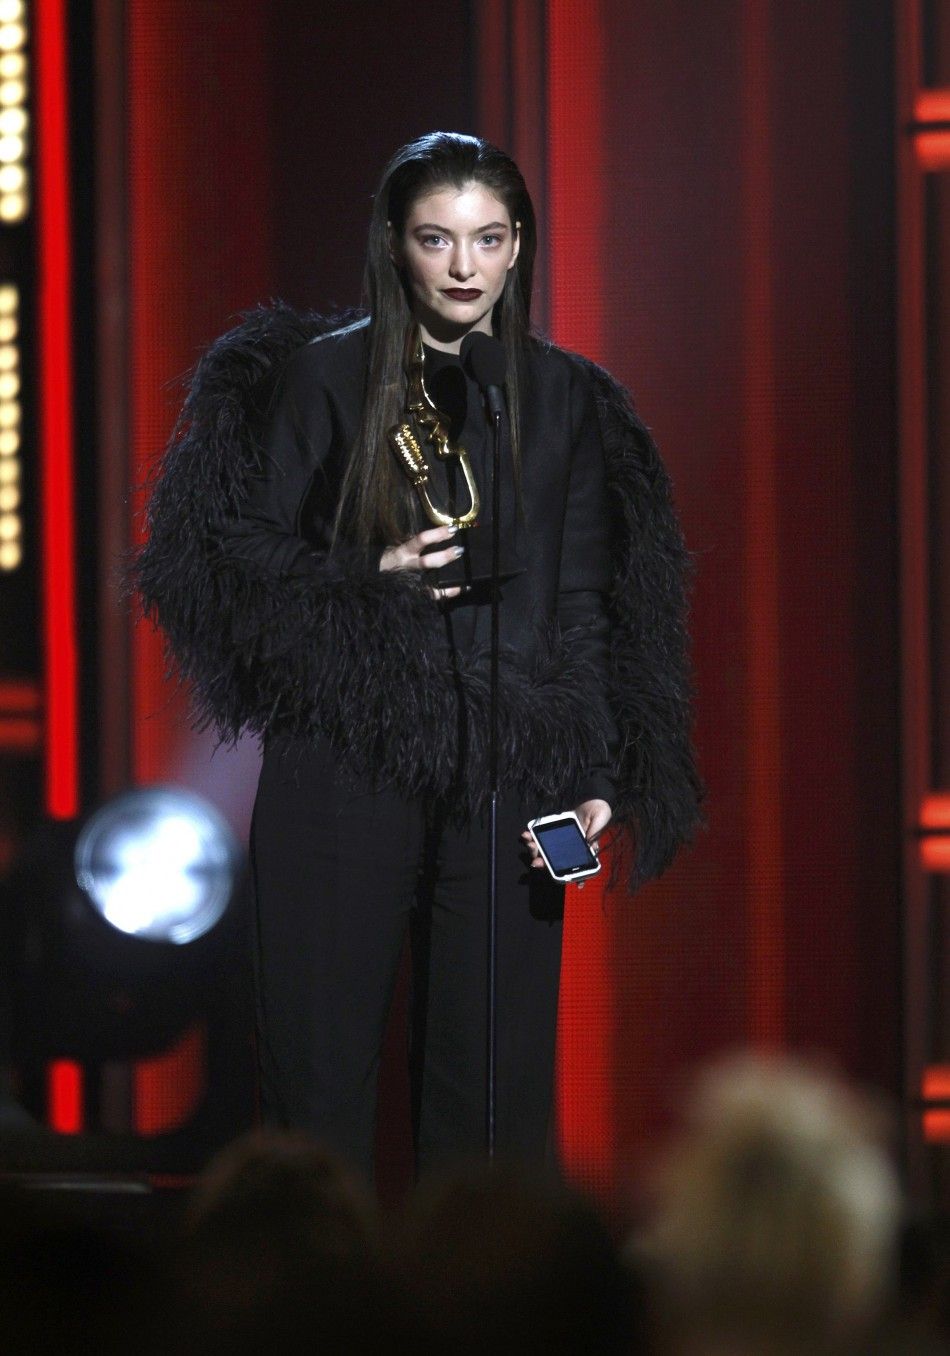 Singer Lorde accepts the top new artist award onstage at the 2014 Billboard Music Awards in Las Vegas